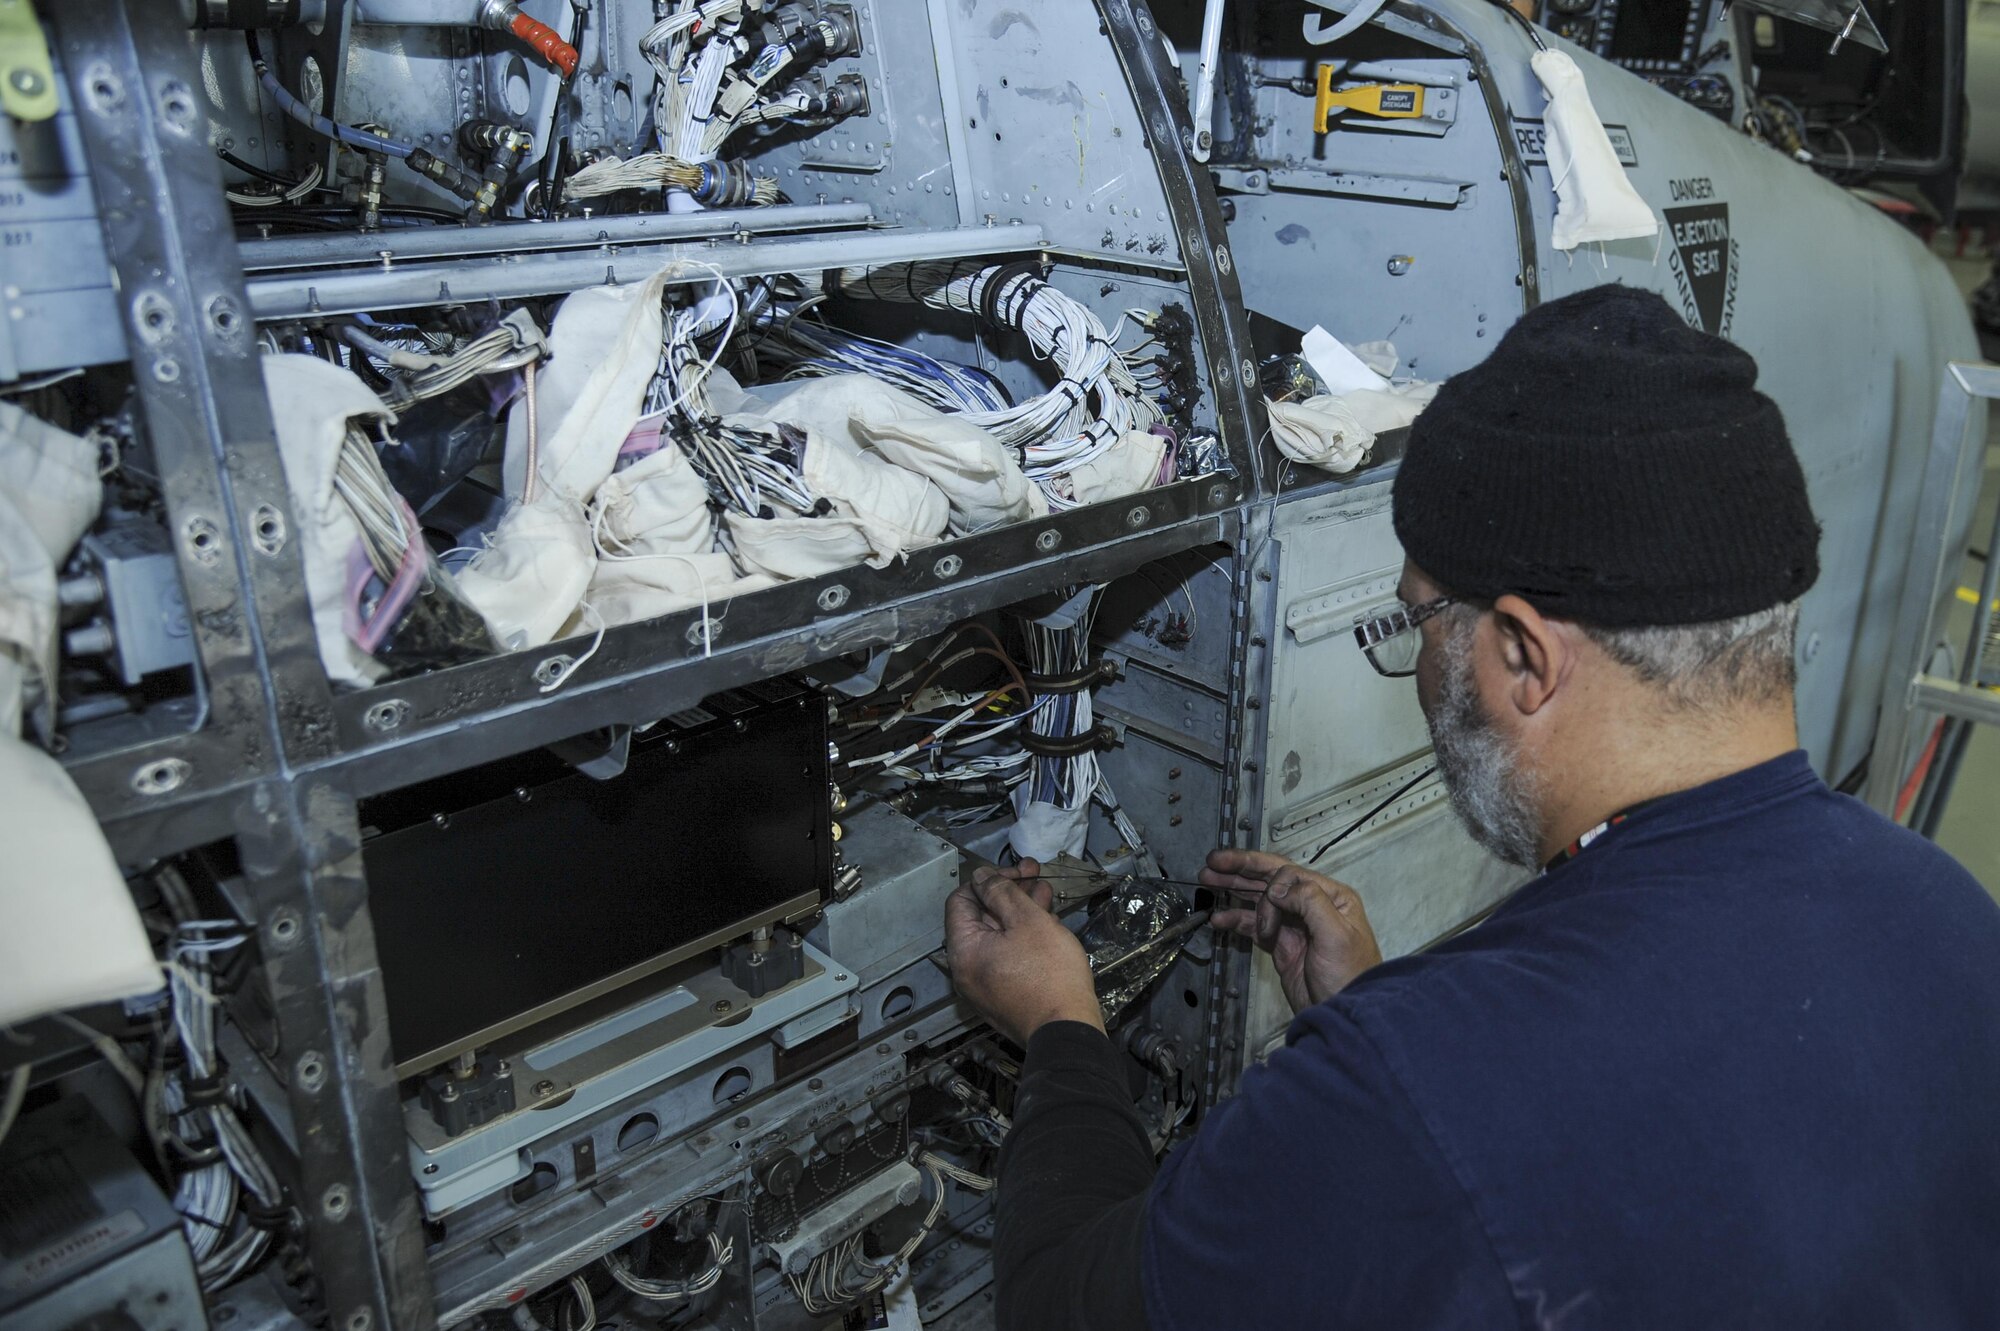 David Antrobus, 309th Aircraft Maintenance and Regeneration Group aircraft technician, installs antenna wires for a lightweight airborne recovery system into an A-10C Thunderbolt II at Davis-Monthan Air Force Base, Ariz., Dec. 5, 2016. The new LARS upgrade provides pilots with GPS coordinates to friendly ground forces and allows them to communicate via voice or text. (U.S. Air Force photo by Airman 1st Class Mya M. Crosby)